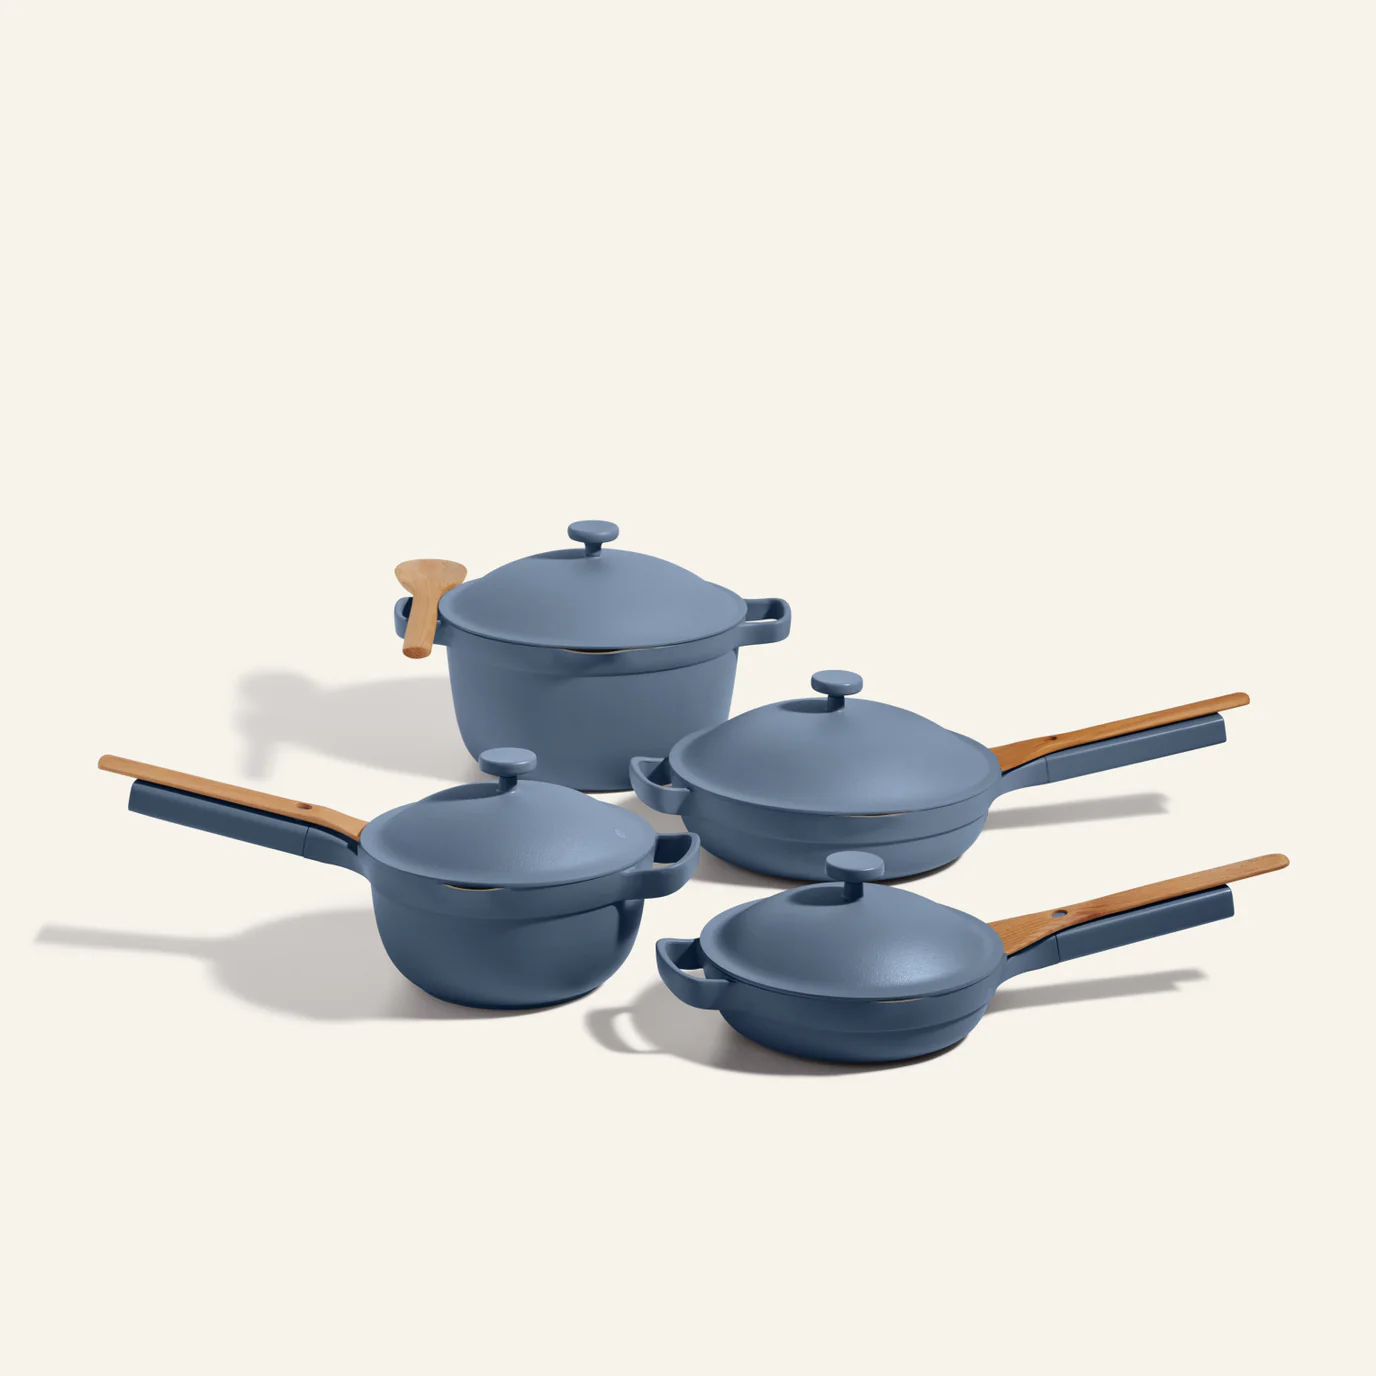 30% Off The Cookware Set